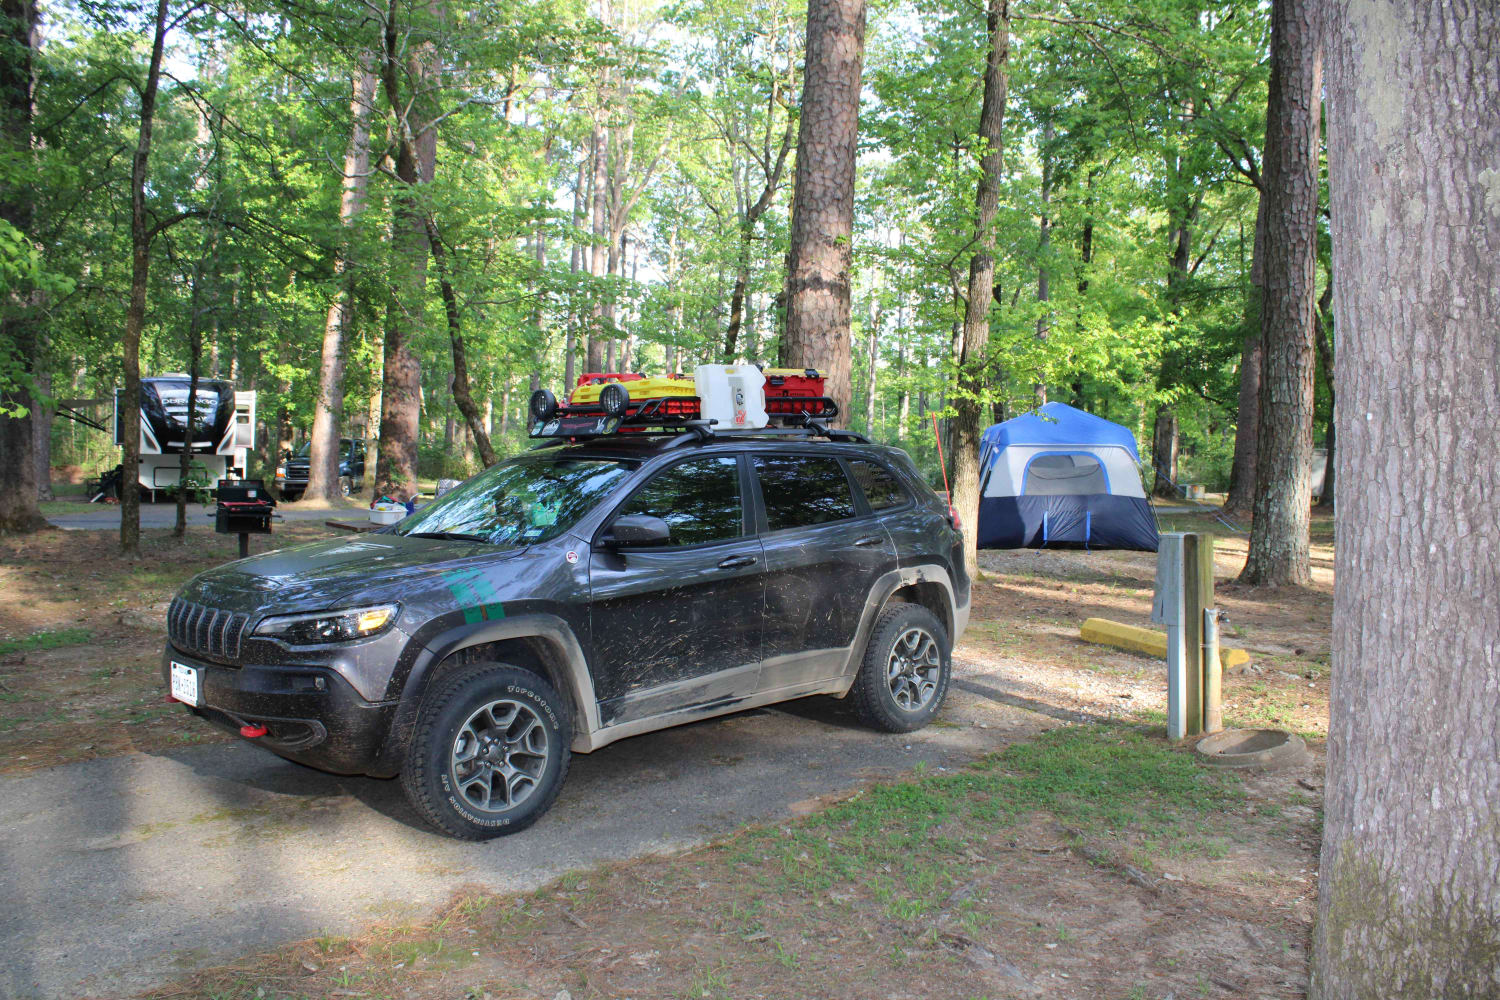 The Arkansas Overland Route – TrailHawk Loop – Section 21 – Haus SP